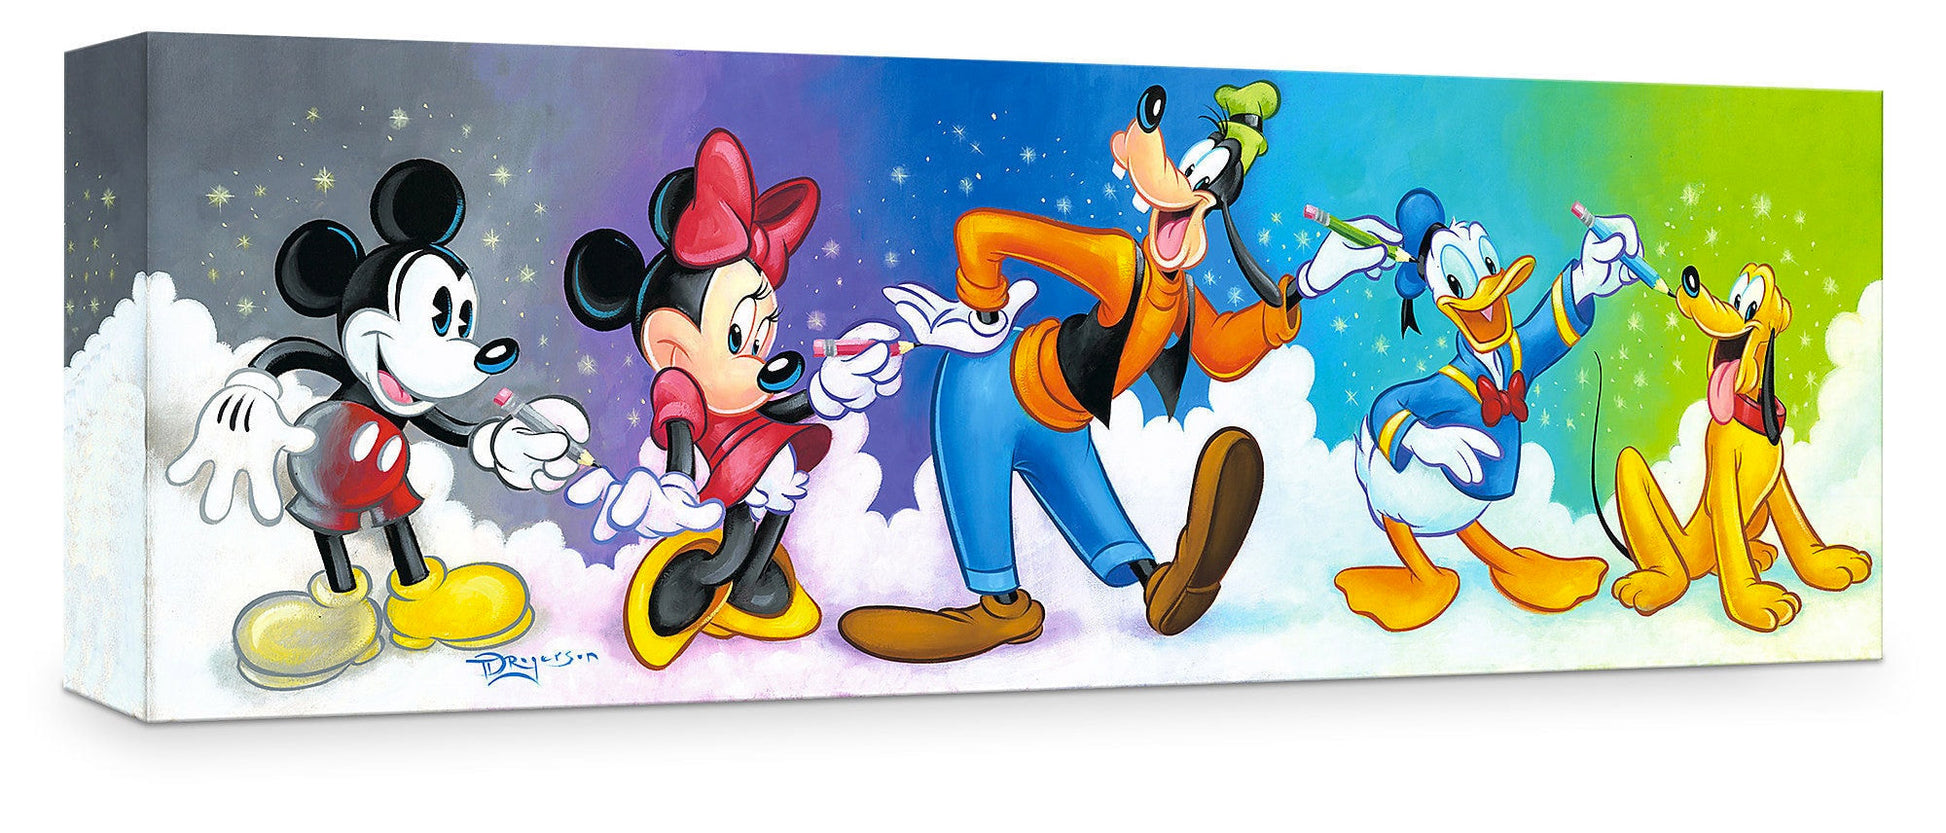 Tim Rogerson Disney "Friends by Design" Limited Edition Canvas Giclee